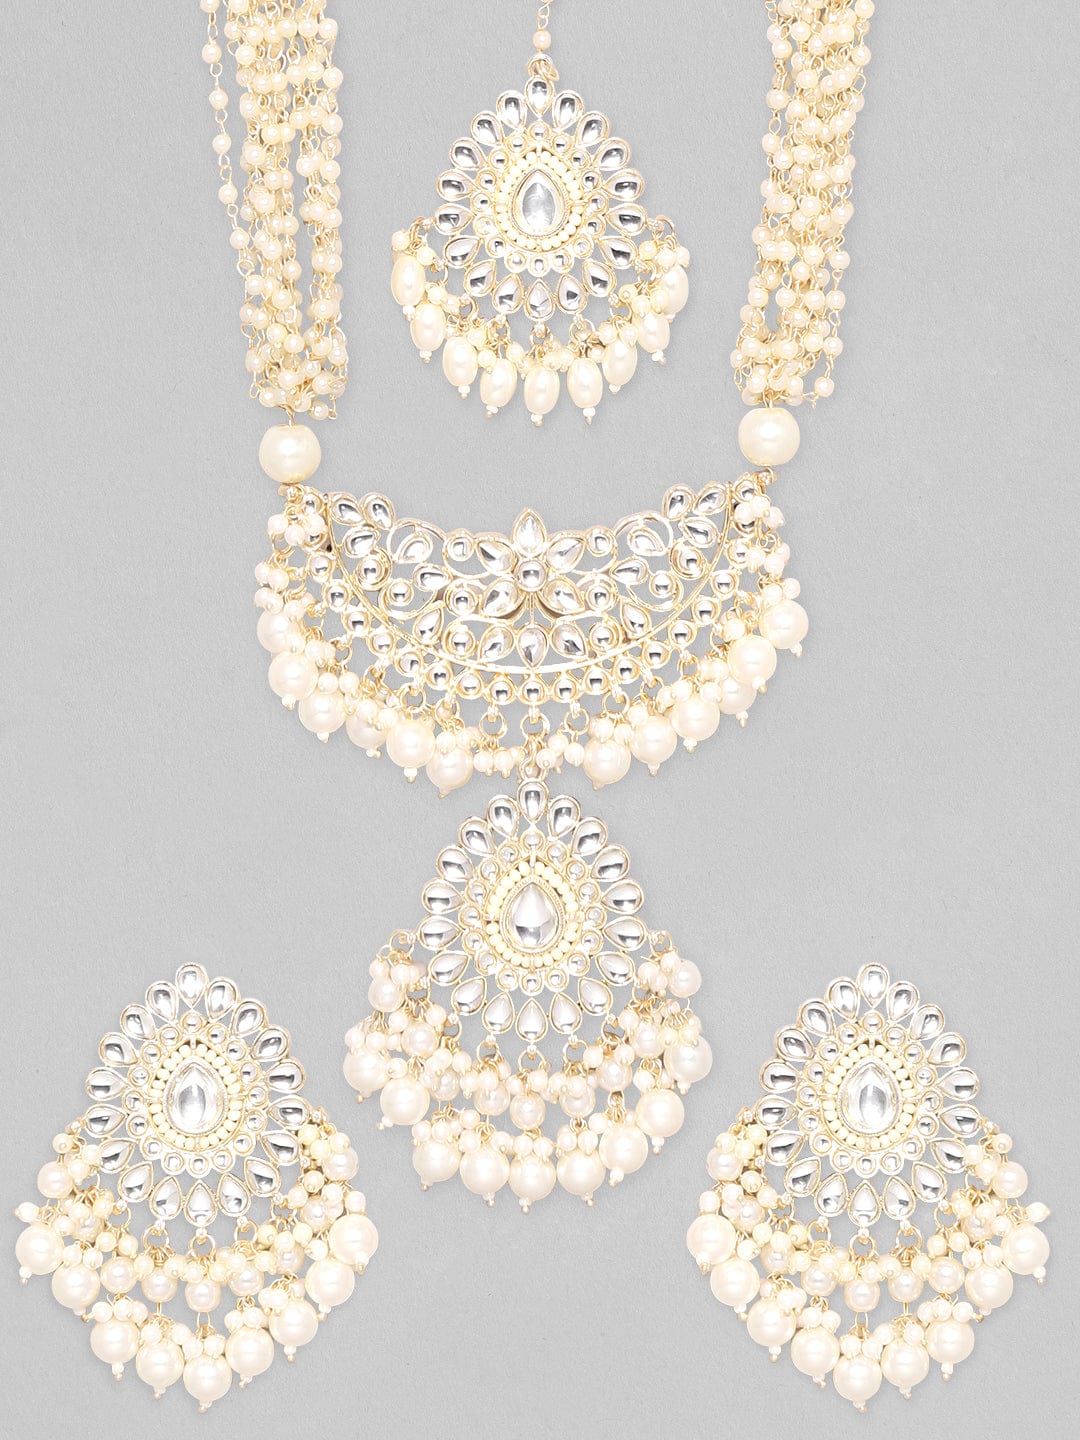 Rubans Gold Plated Kundan stones with Pearl Beaded Jewellery Set Necklace Set